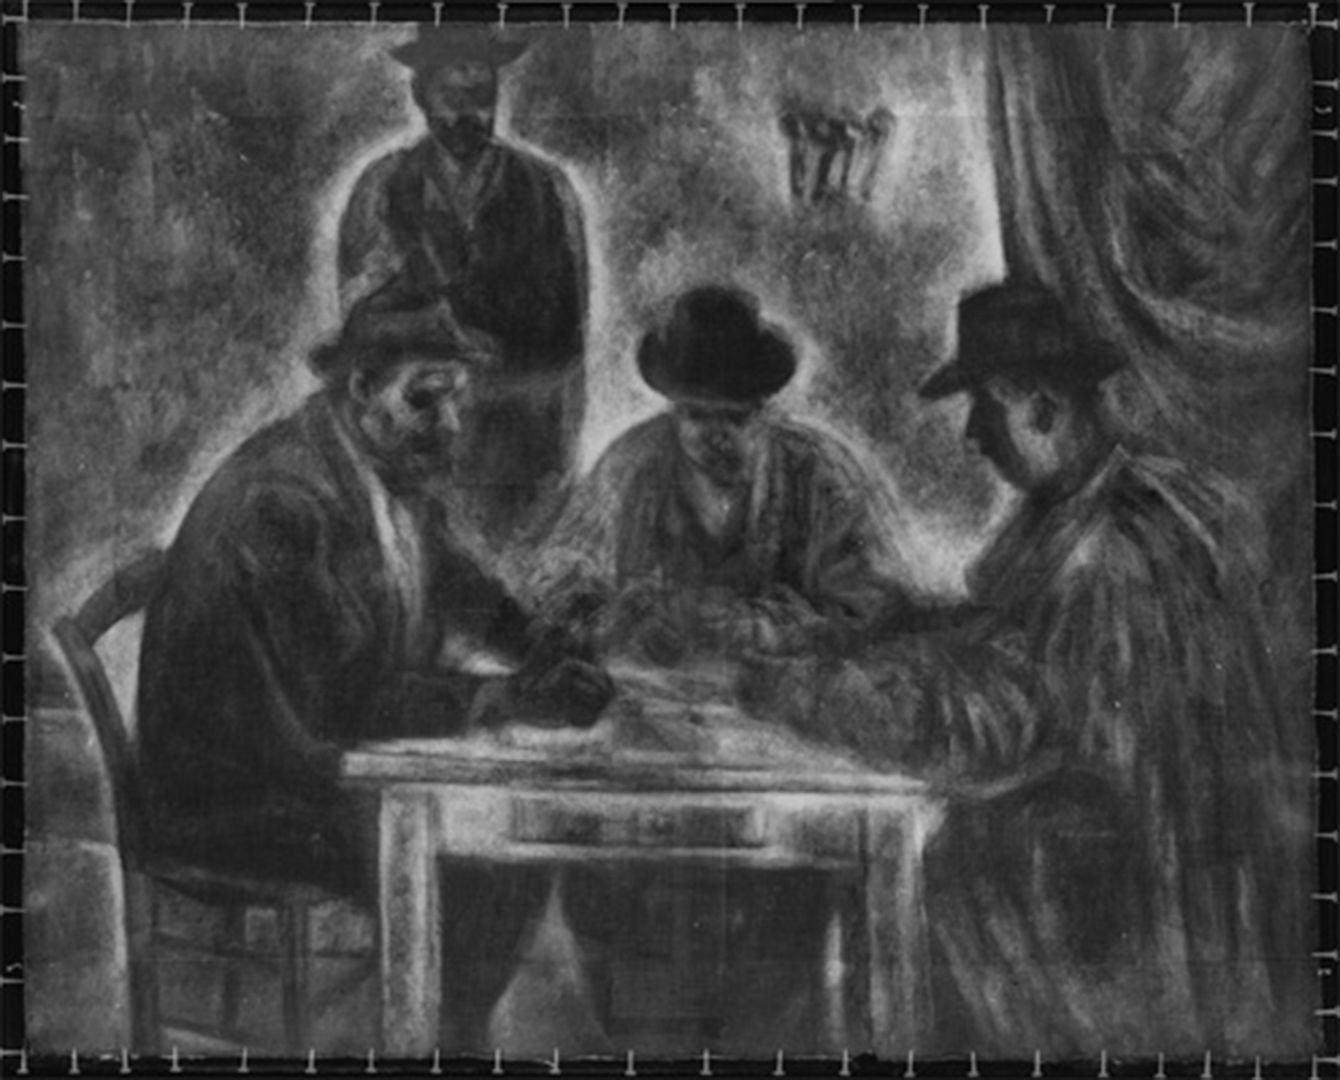 A xray image of a group of three men playing cards while one stands by smoking watching the game.